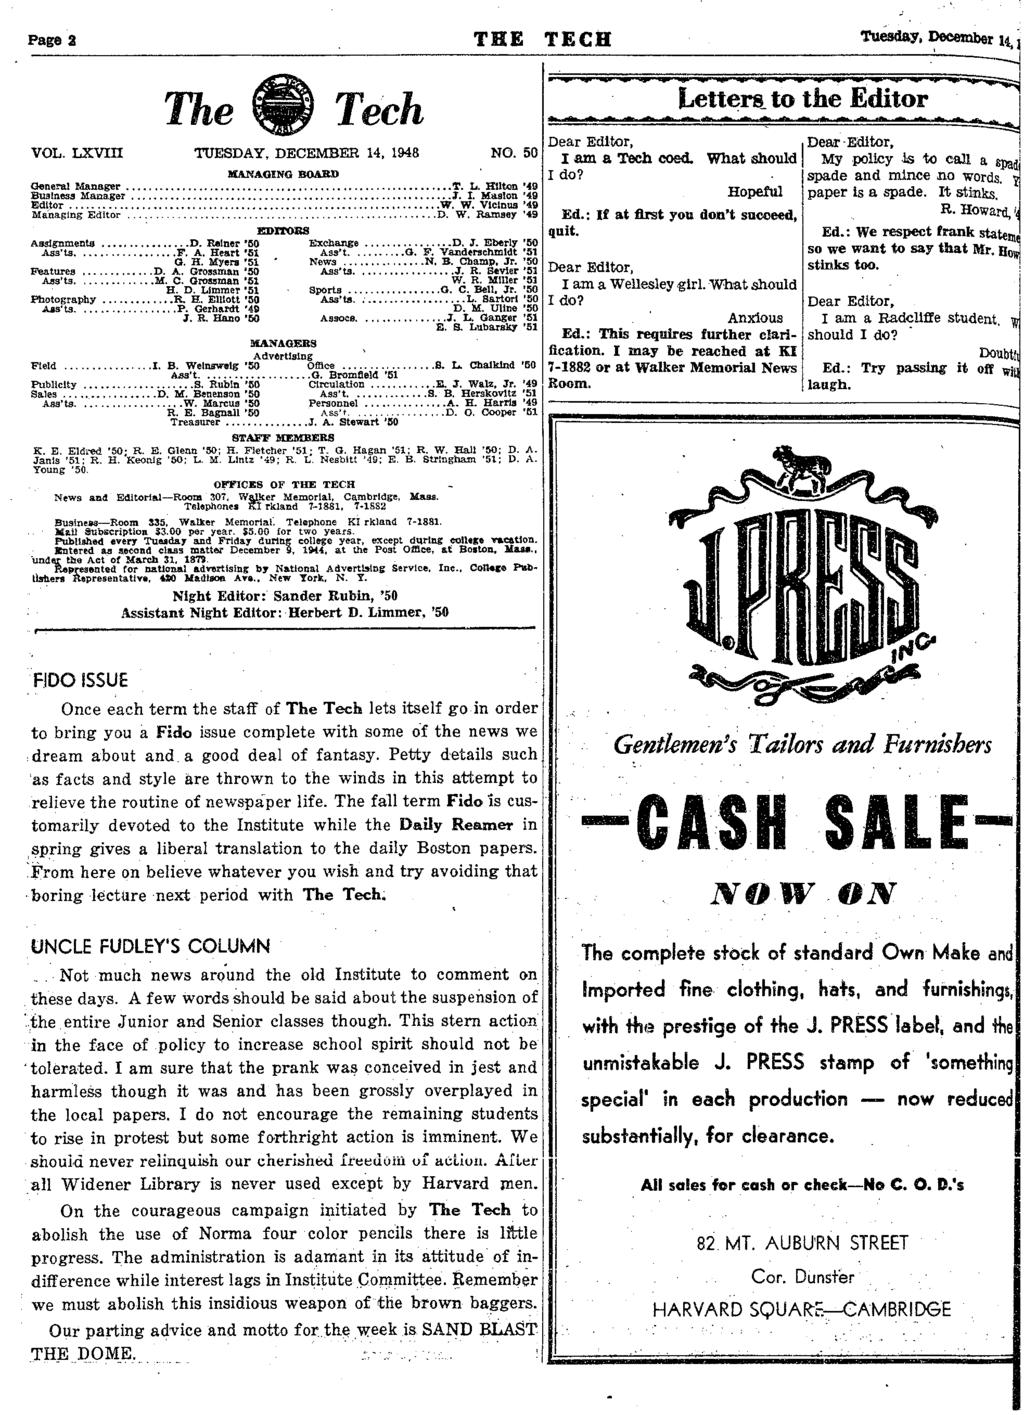 Page 2 THr~E TECH d atuesfdy, Deemtber 11, The n Tech VOL. LXV TUESDAY, DECEMBER 14, 1948 NO. 50 A-NAGNG BOARD General Manager... L. Hlton '49 Busness Manager.... Maslon '49 Edtor...... W.